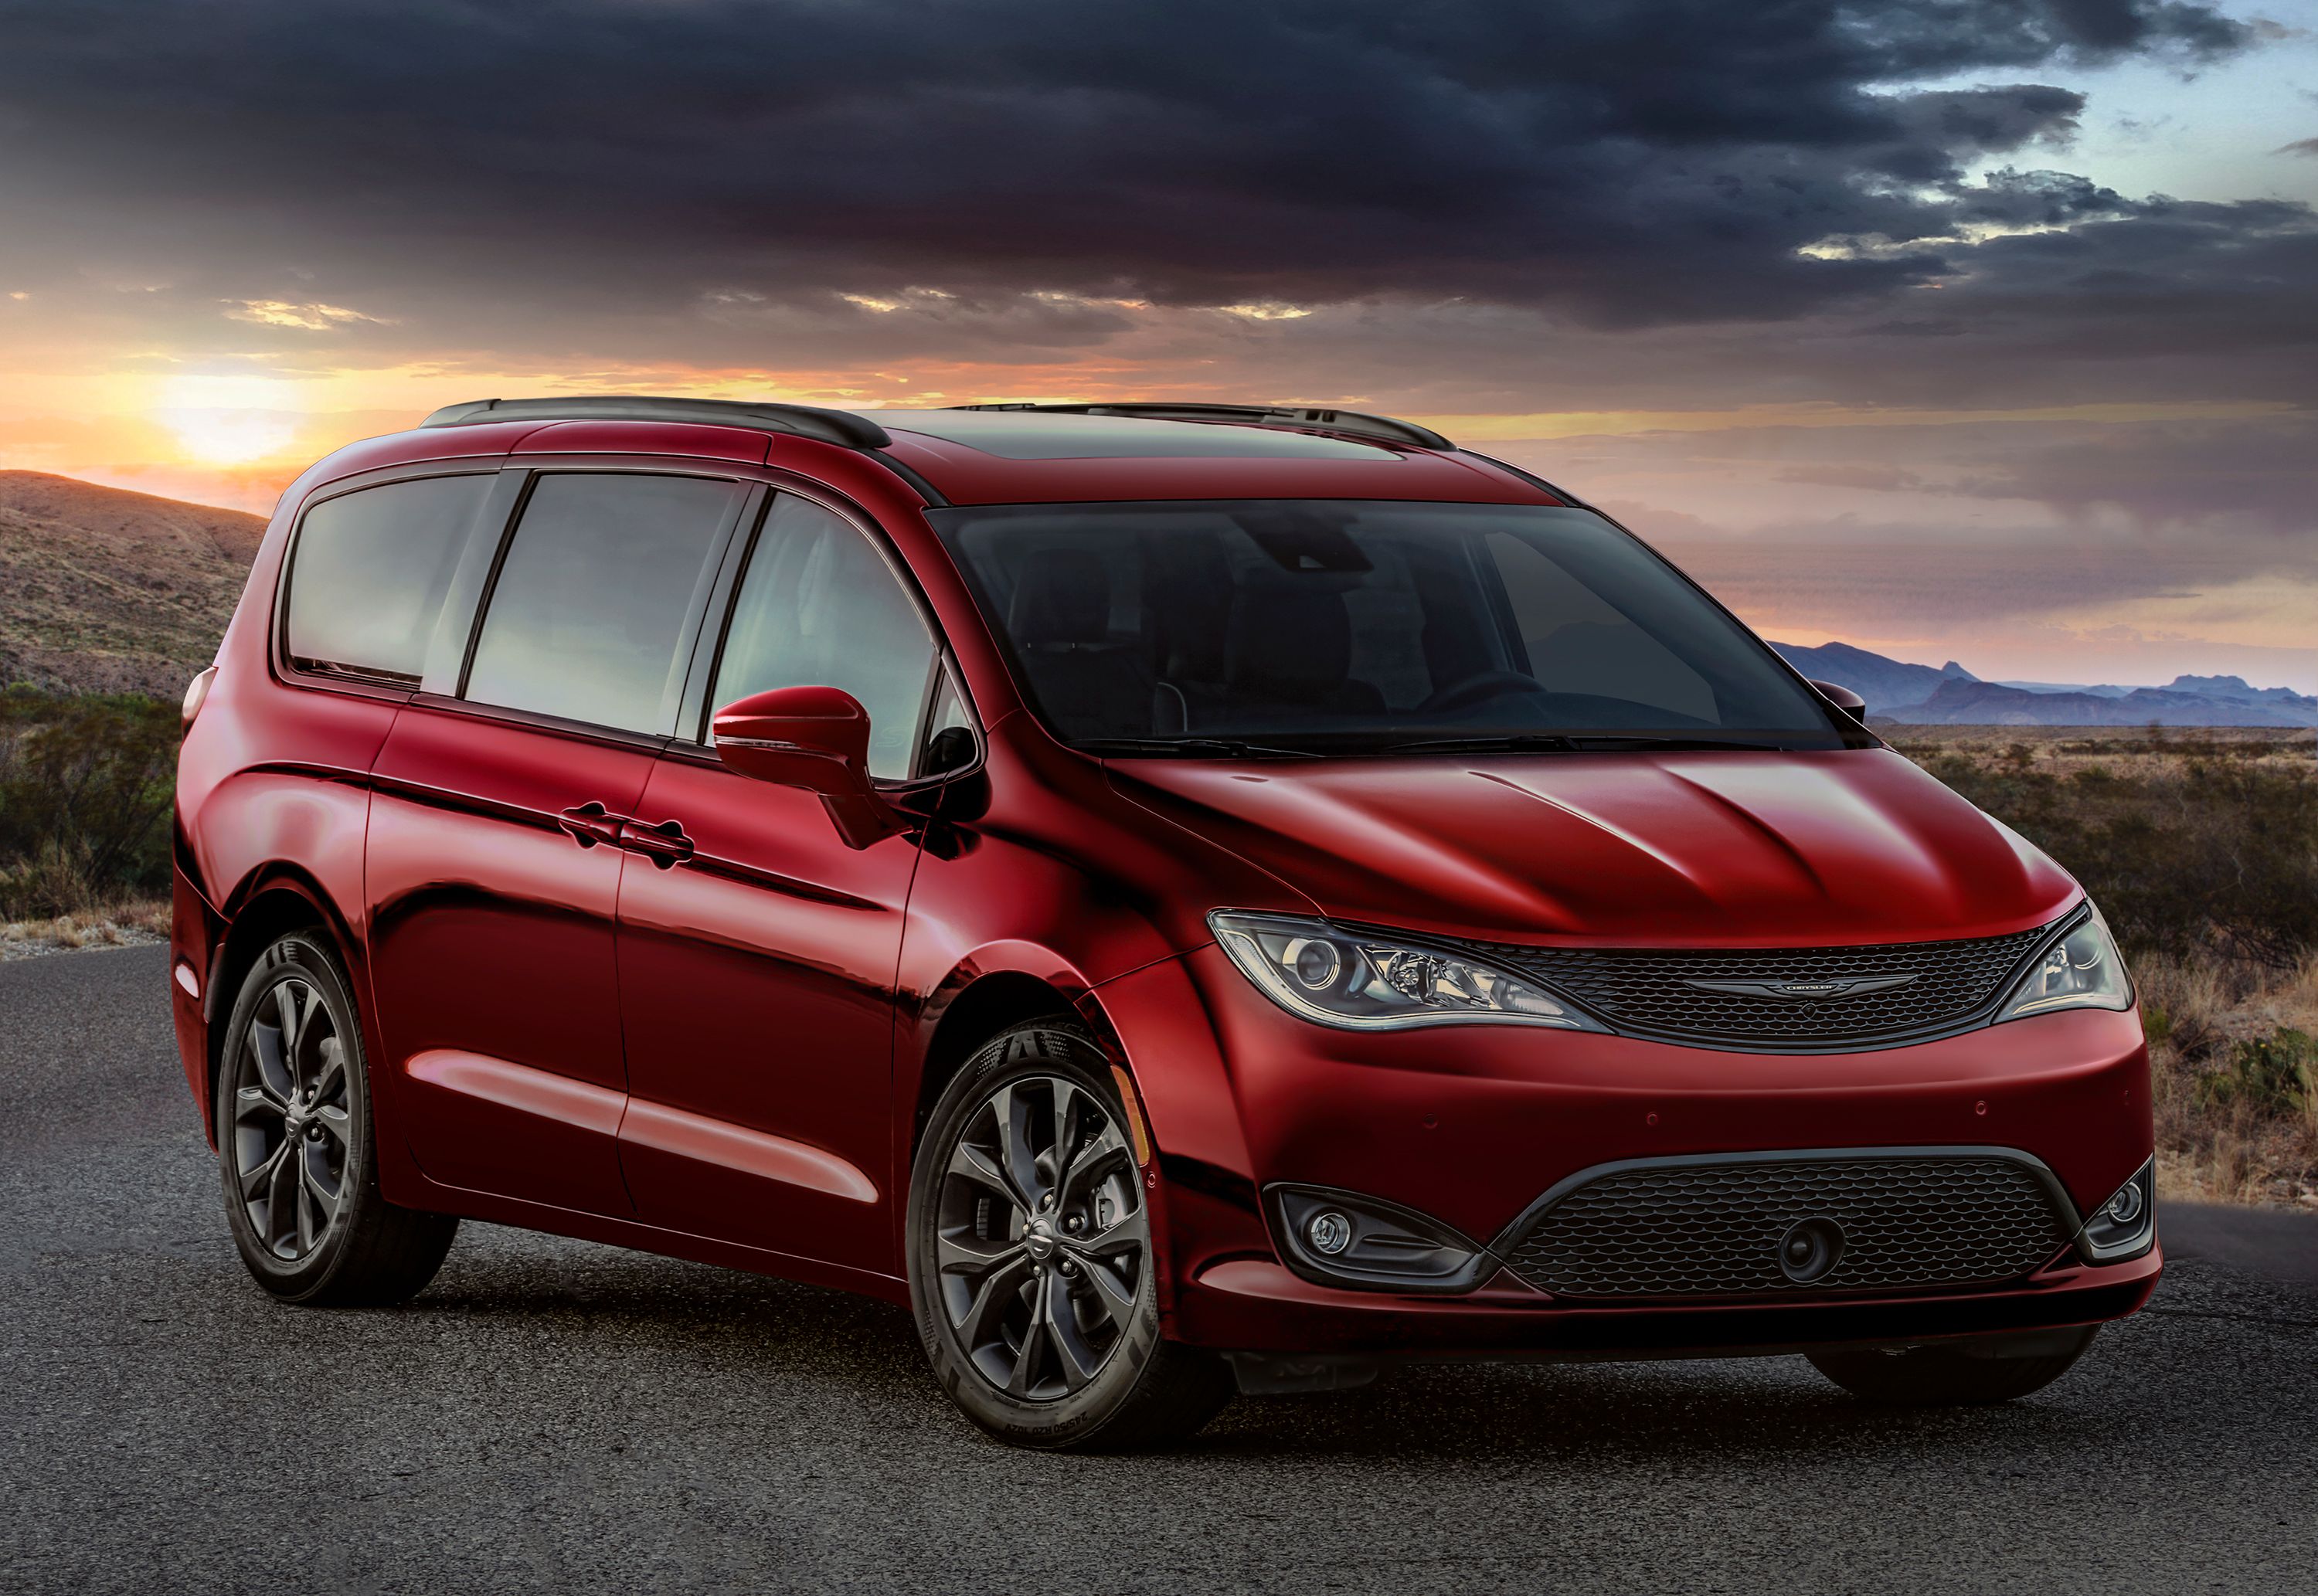 2019 Dodge Grand Caravan and Chrysler Pacifica 35th Anniversary Edition